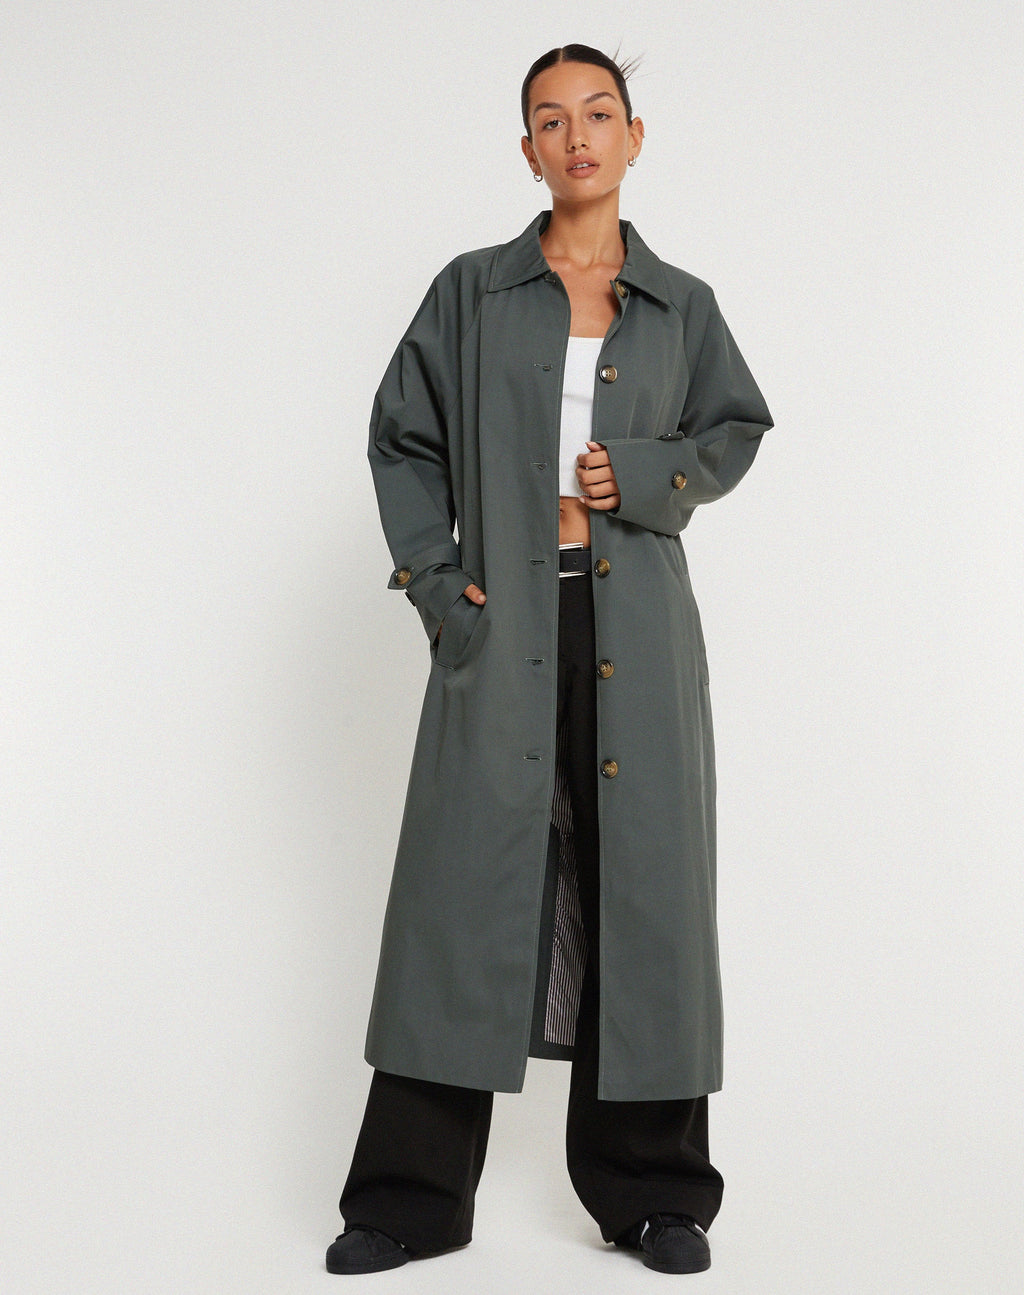 Assa Trench Coat in Light Charcoal with Stripe Lining